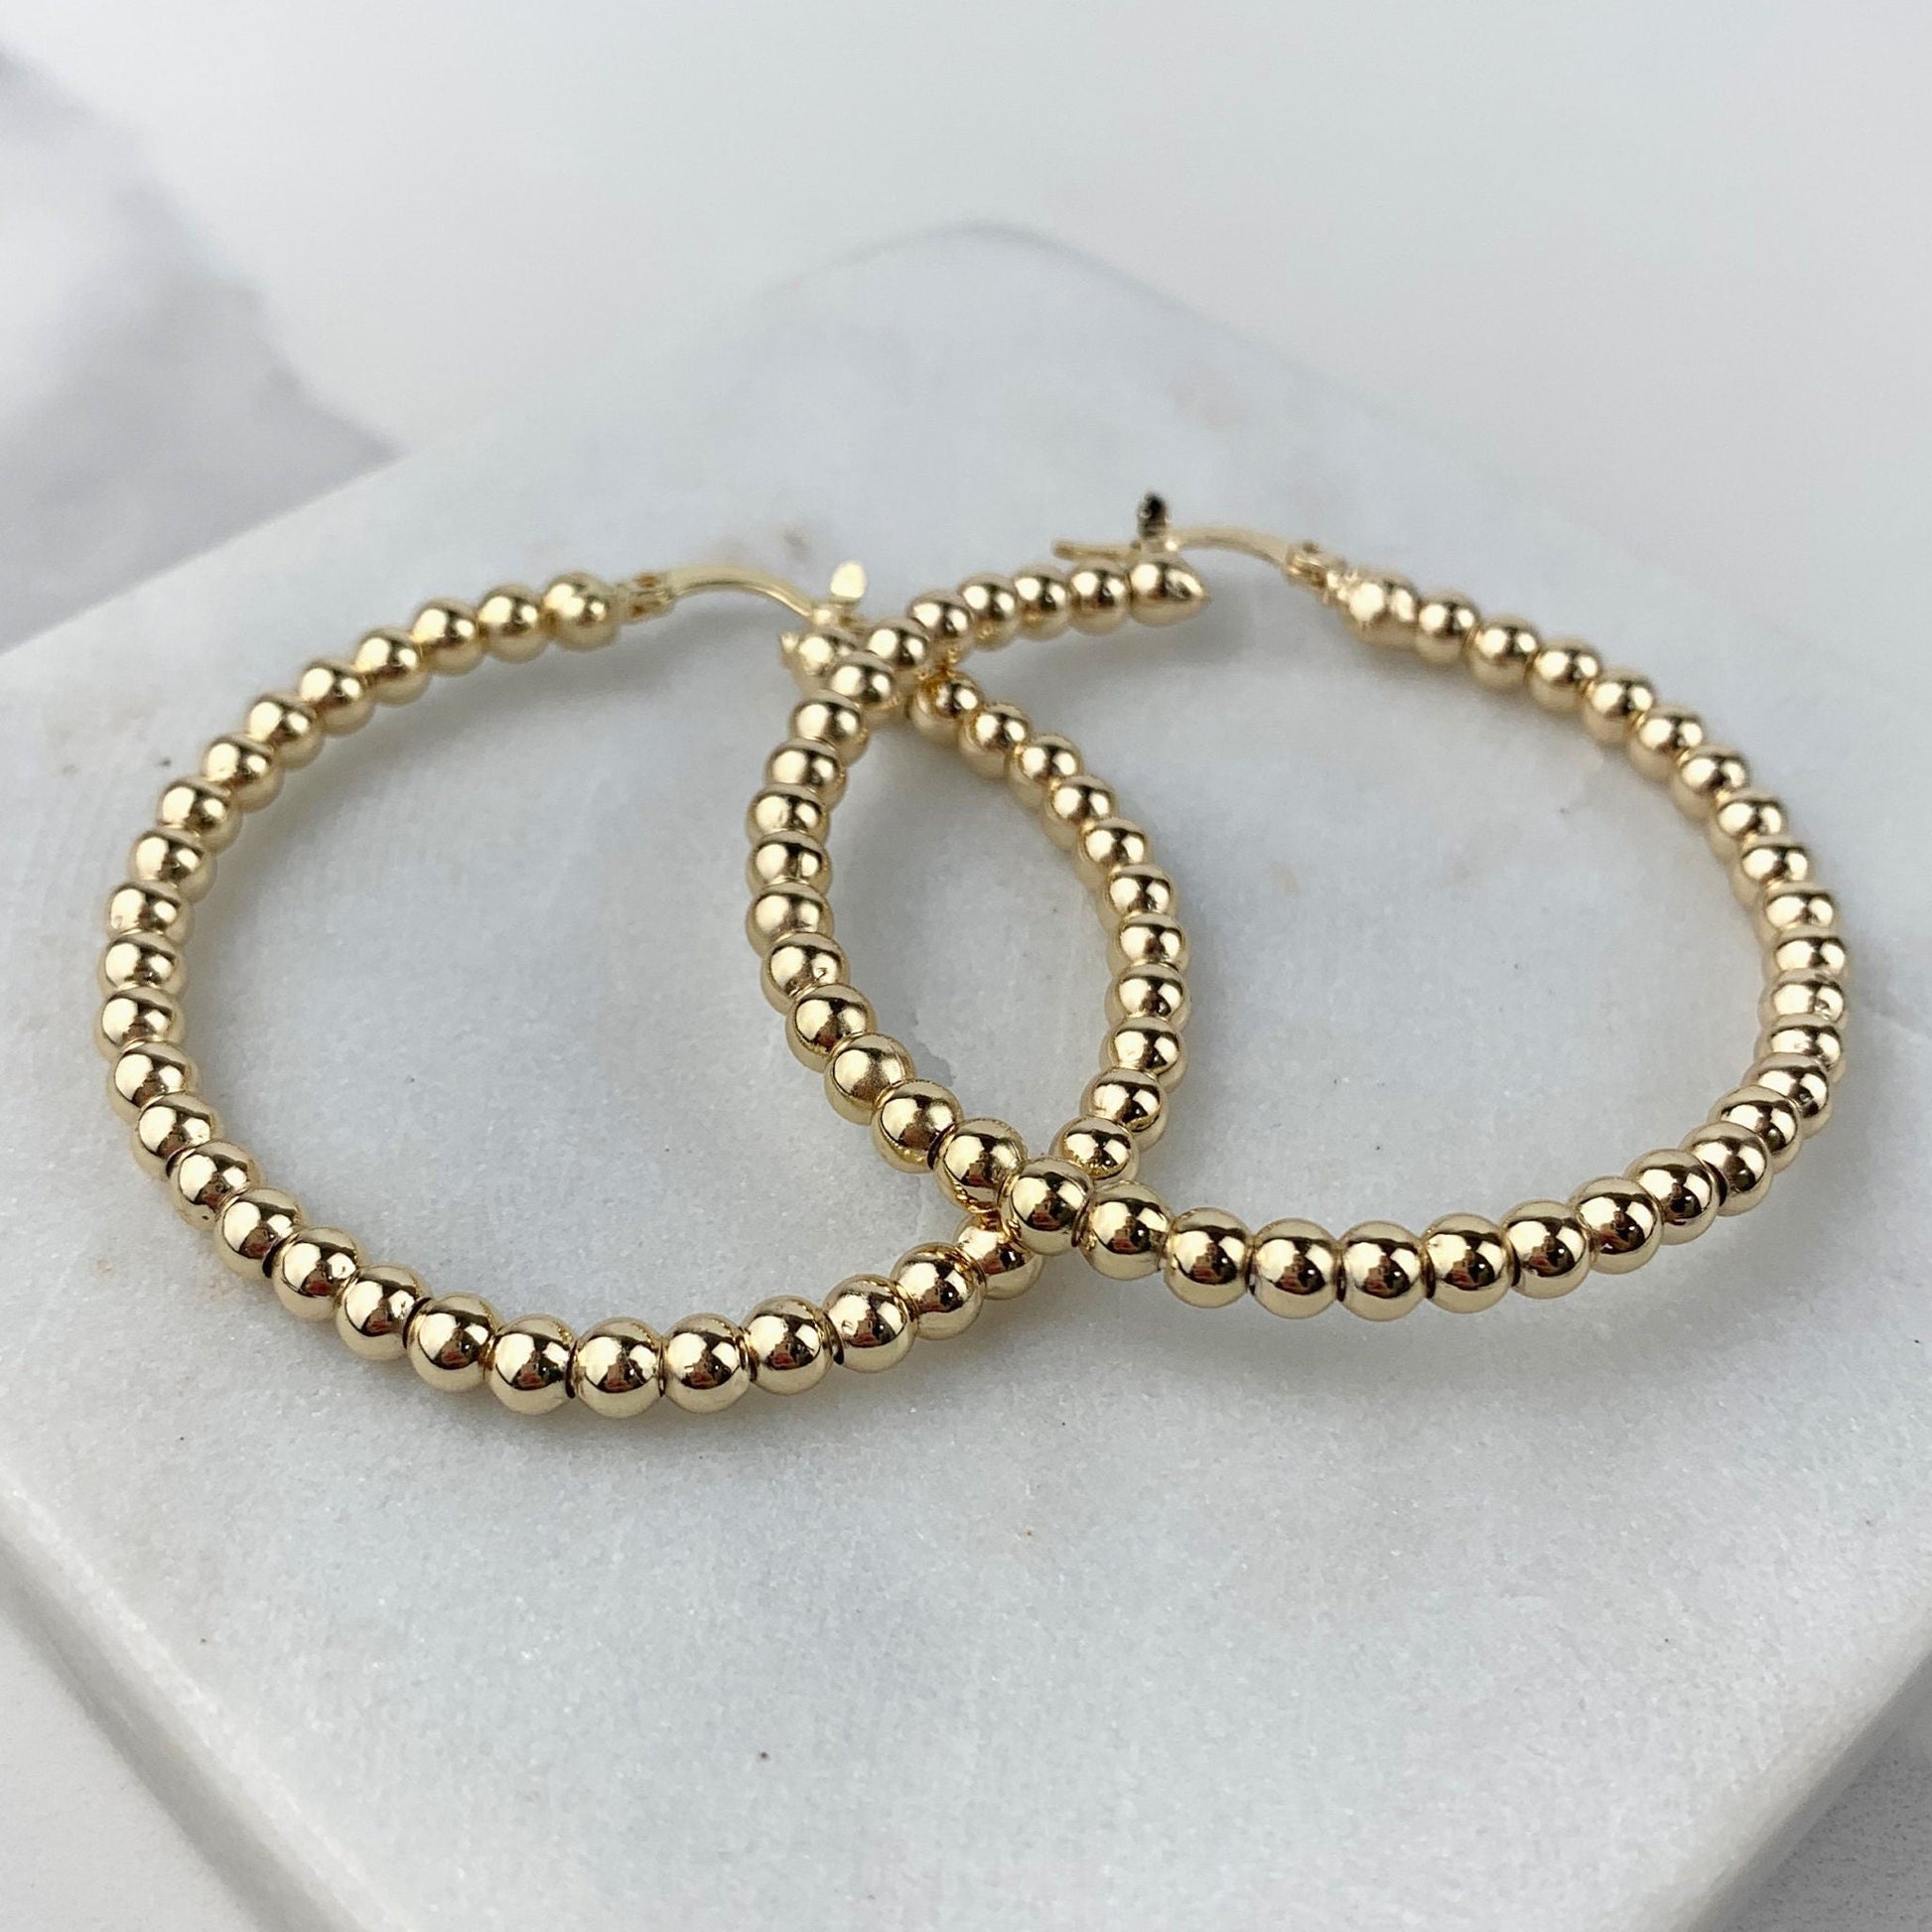 Oubaka 80pcs Beading Hoop Earrings for Jewelry Making,Round Beading Hoop Earrings Bulk Jewelry Making Supplies Jewelry Finding, Gold